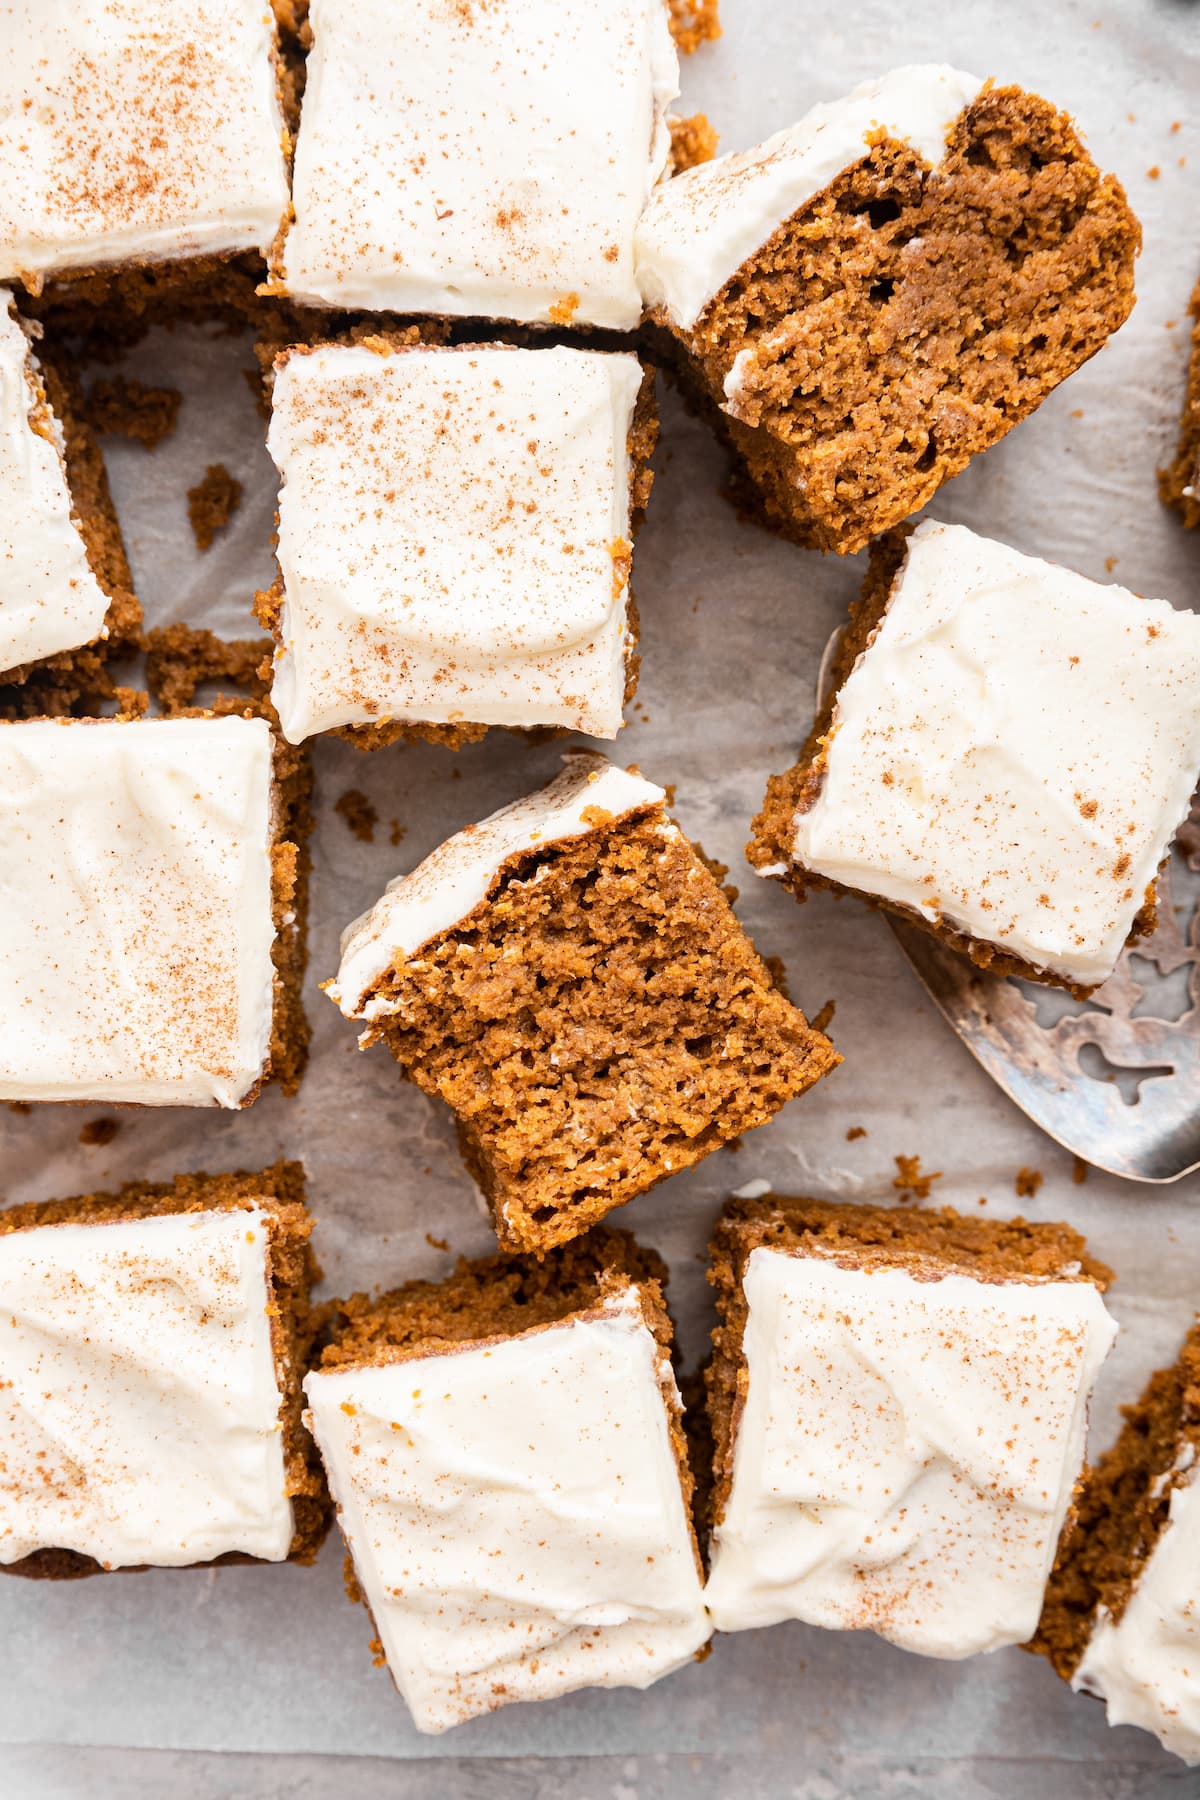 Pumpkin cake slices with a cream cheese frosting on parchment paper.